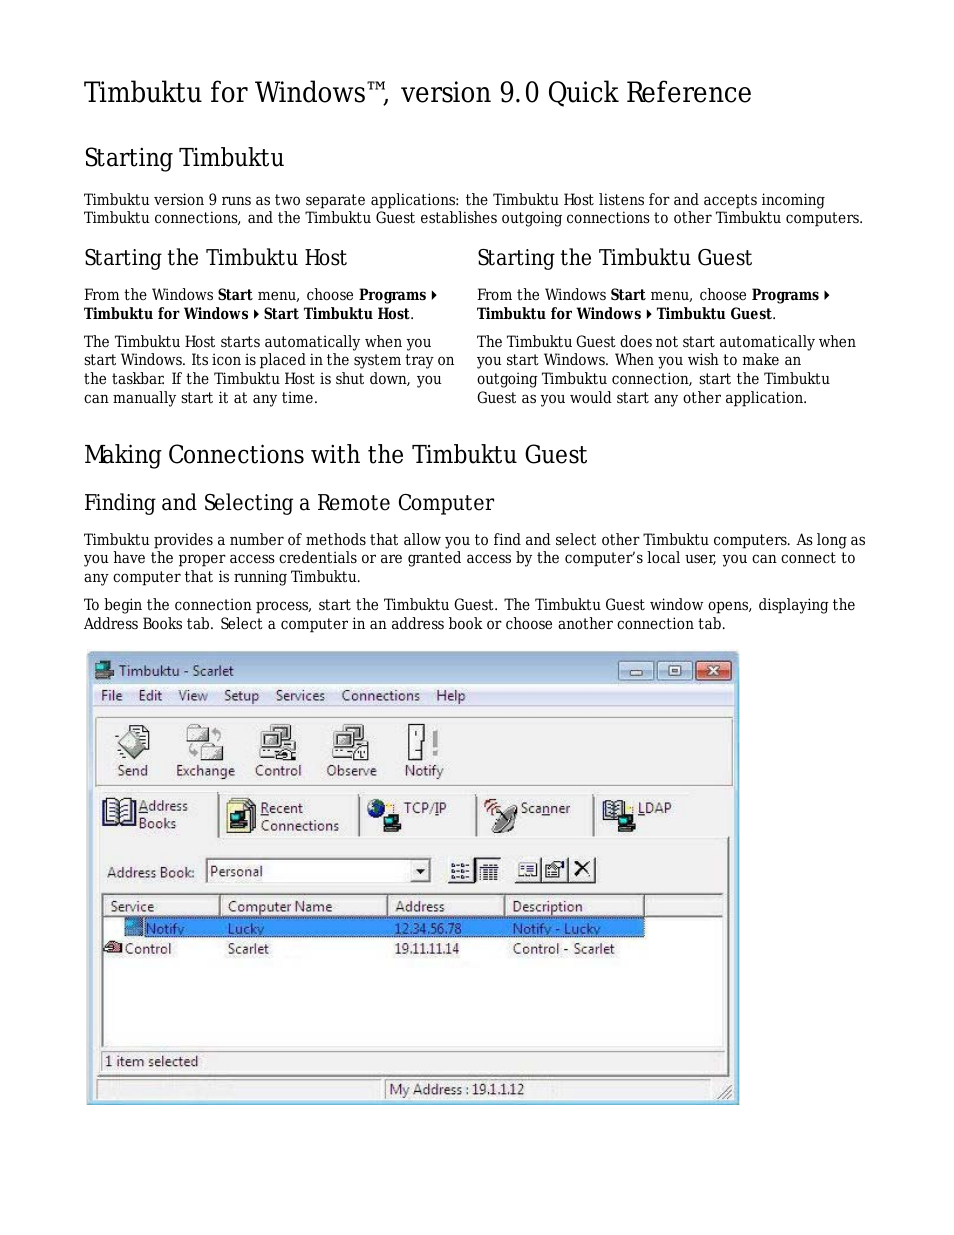 Timbuktu for Windows v9.0.2- At a Glance Guide